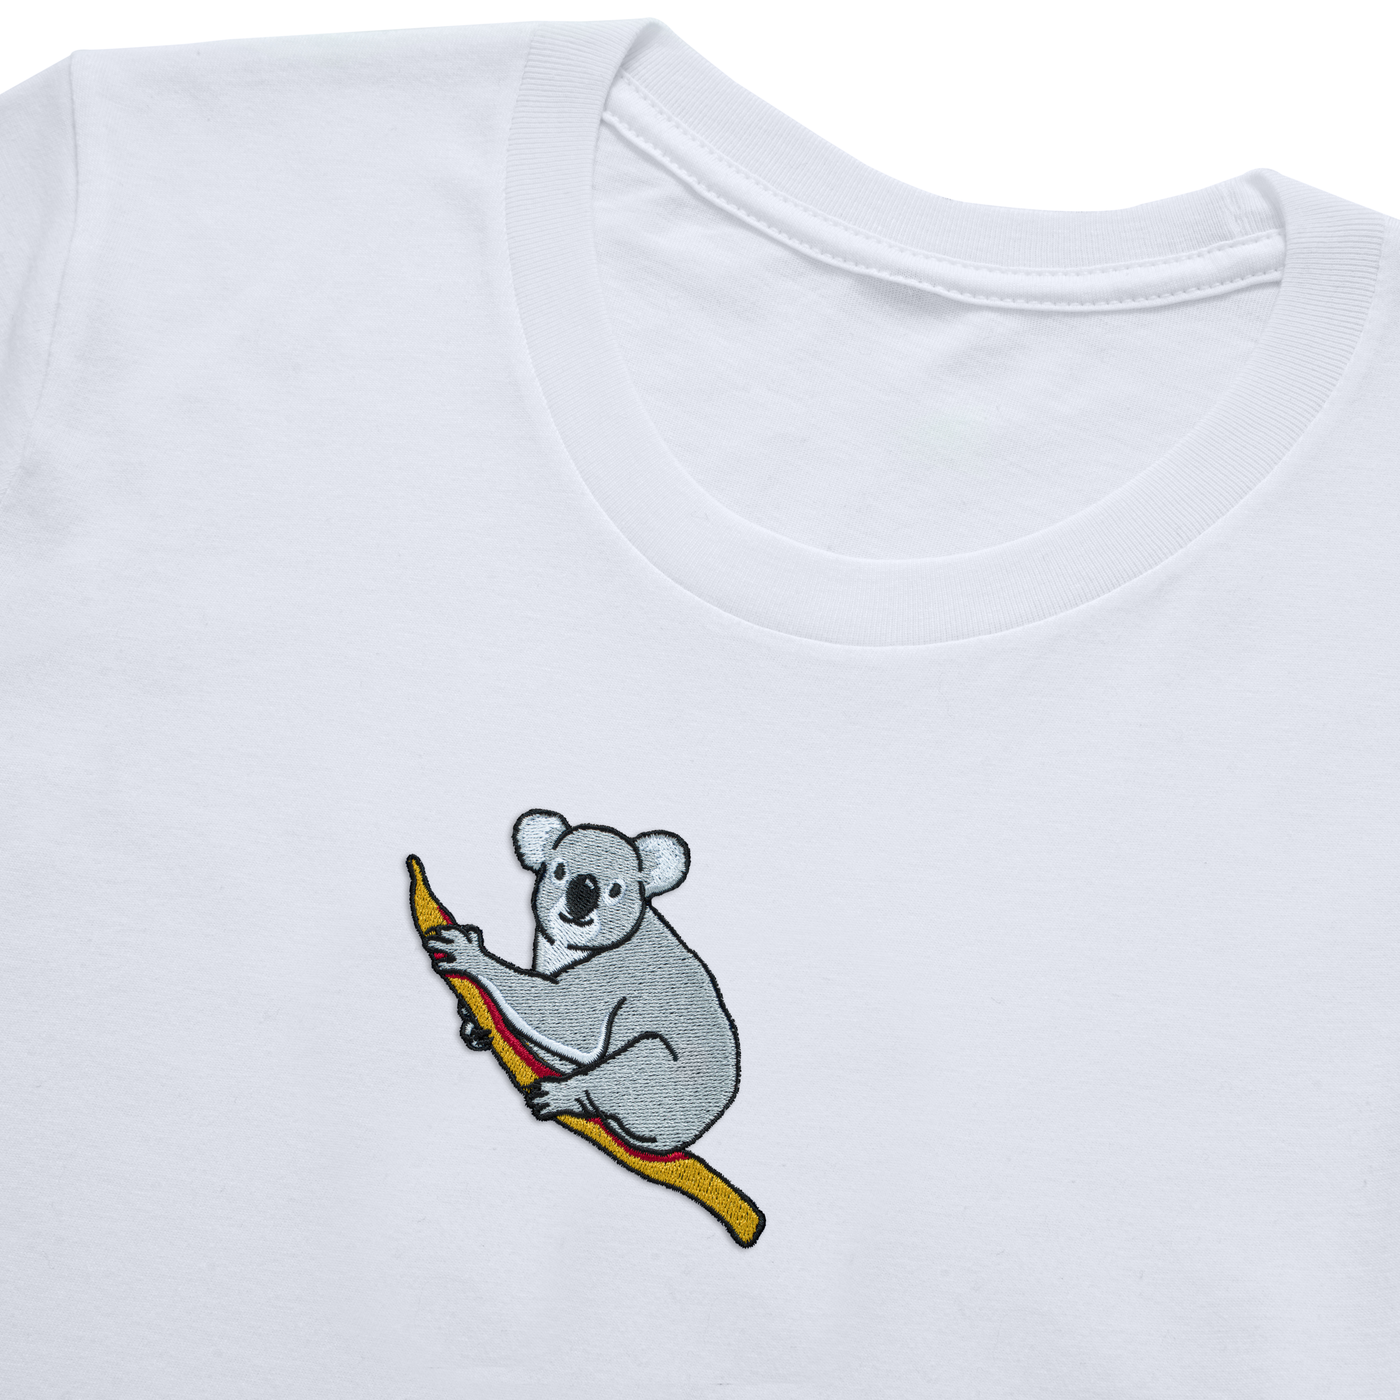 Bobby's Planet Kids Embroidered Koala T-Shirt from Australia Down Under Animals Collection in White Color#color_white